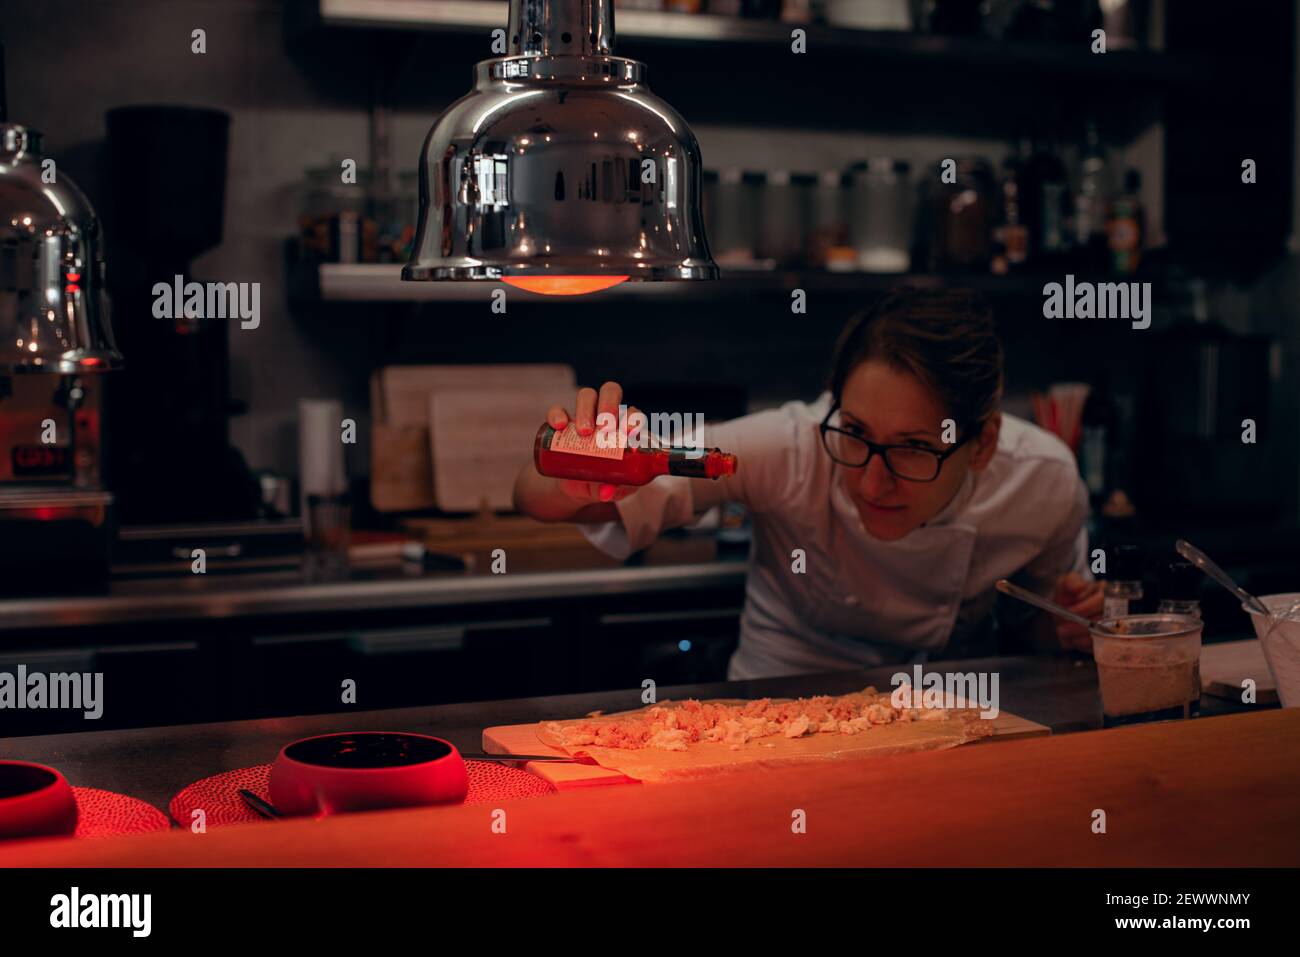 https://c8.alamy.com/comp/2EWWNMY/chef-preparing-food-while-working-with-heat-lamps-in-restaurant-2EWWNMY.jpg